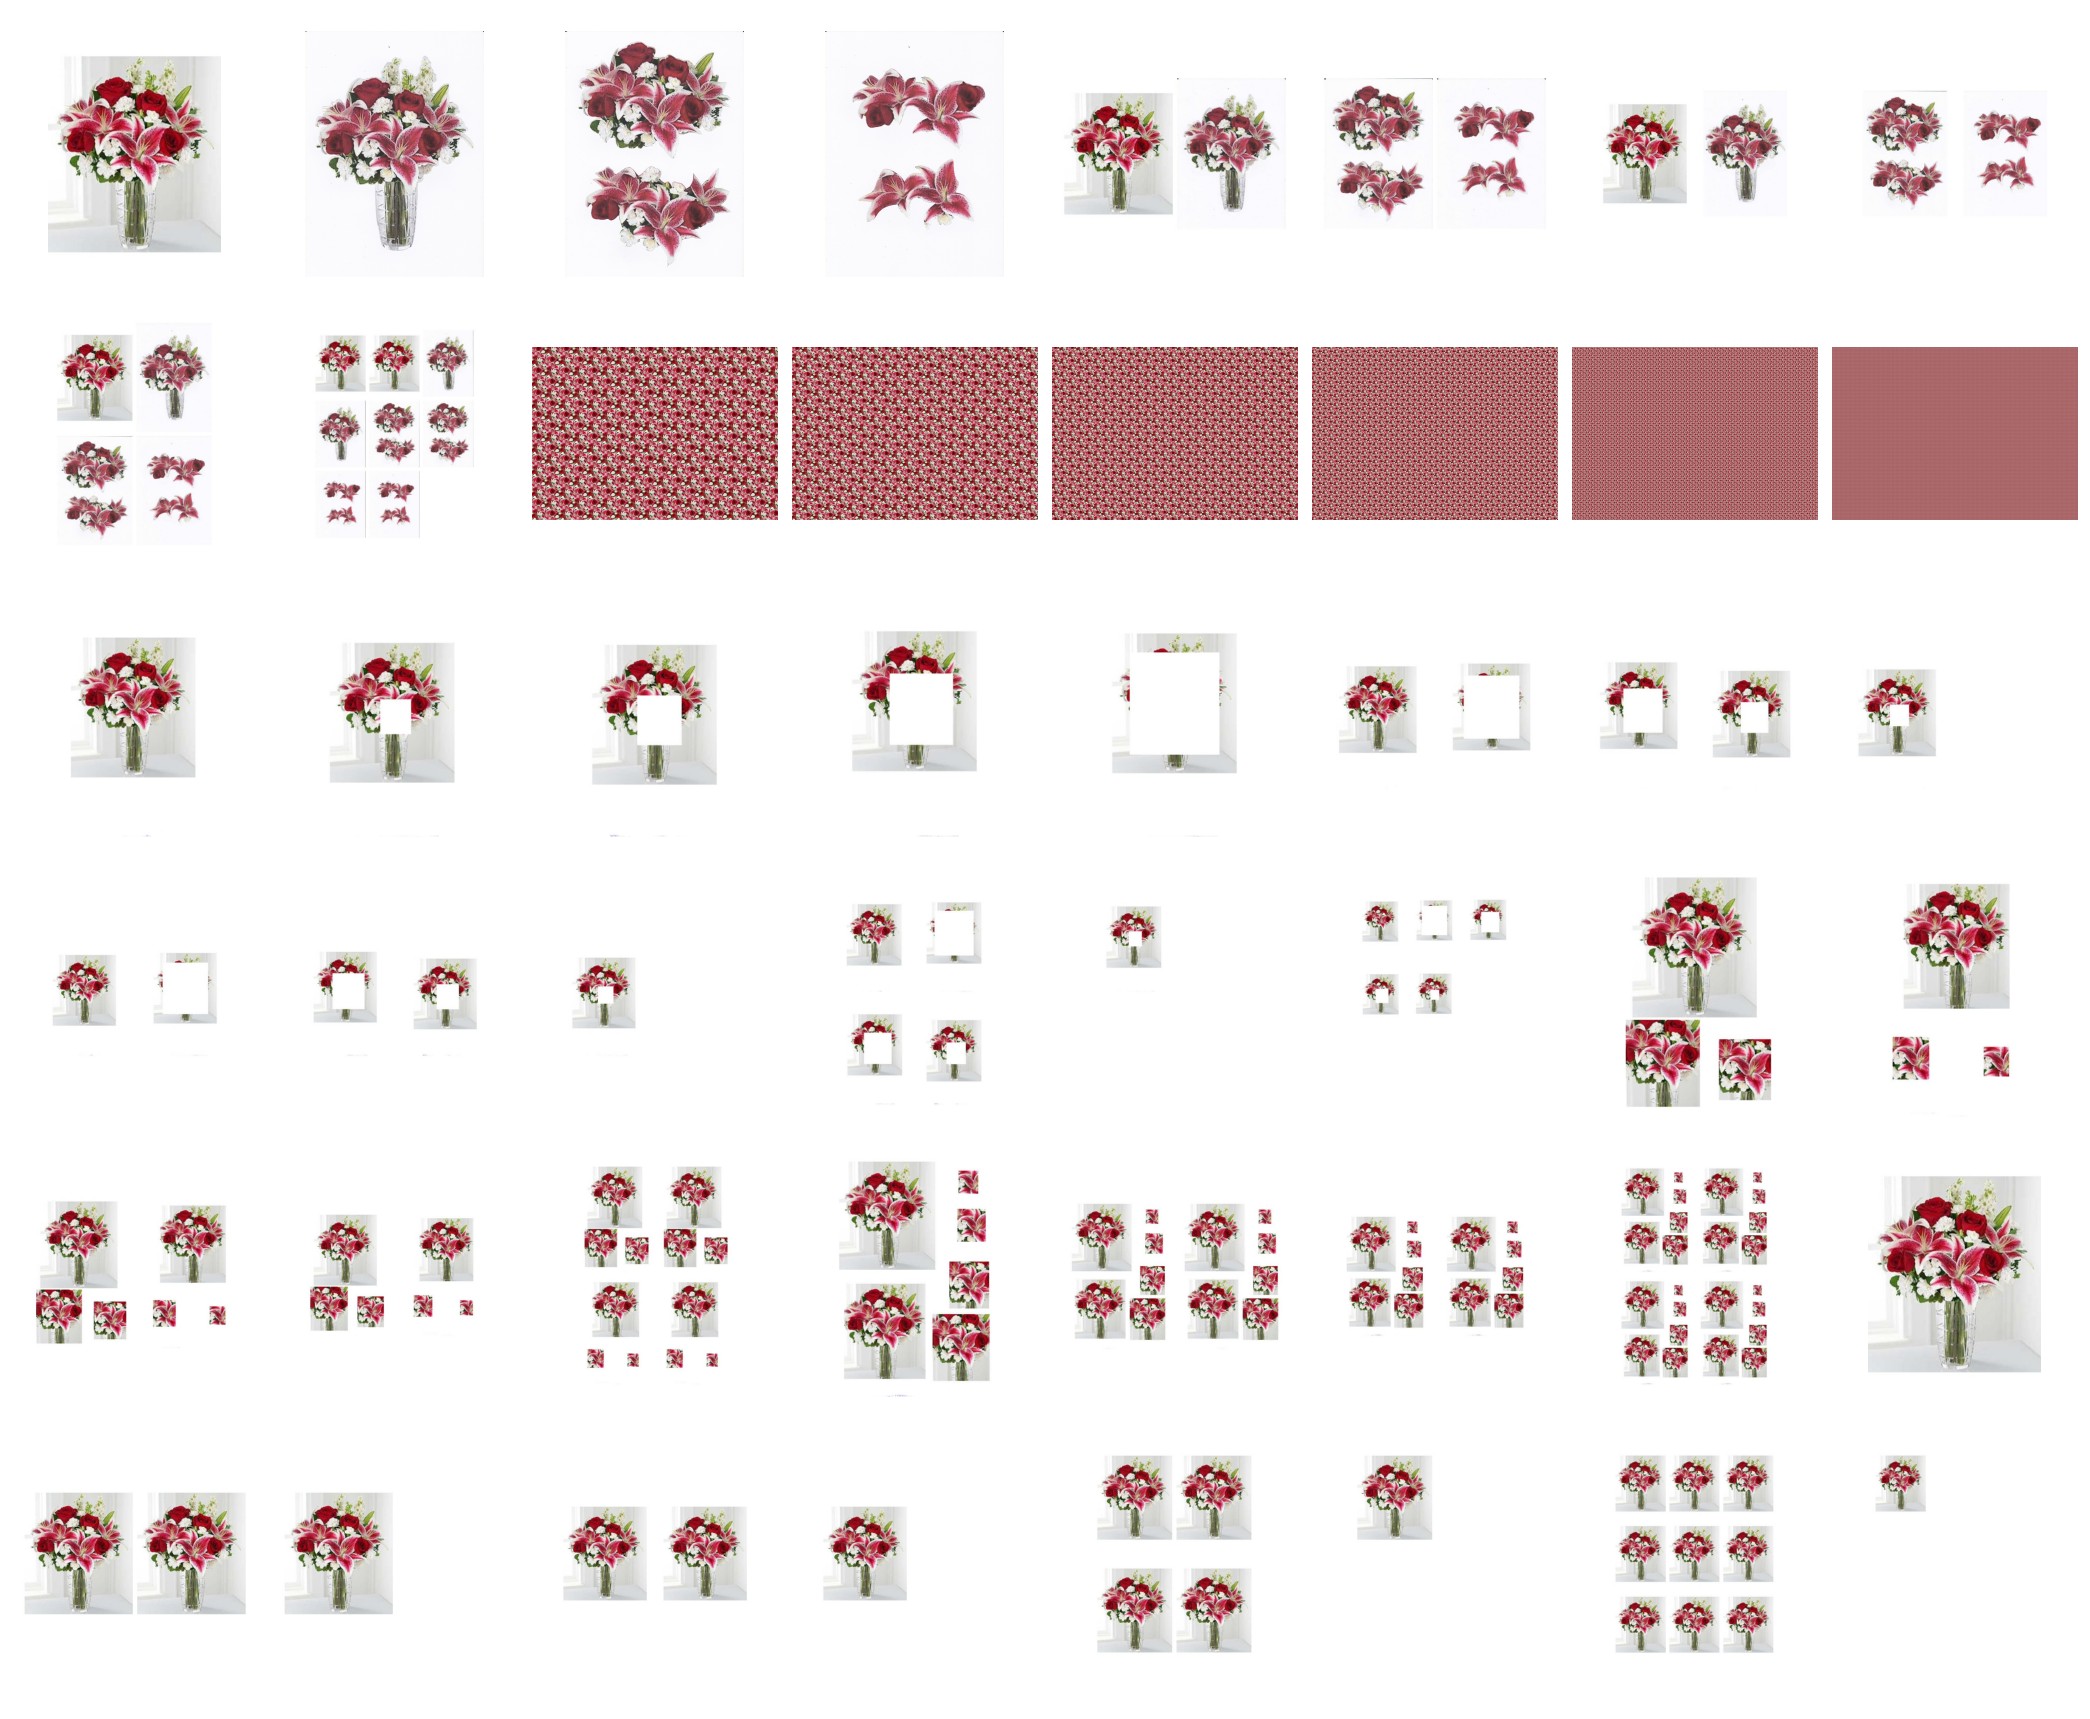 Lilly and Vase Set Including Project - 48 Pages to Download